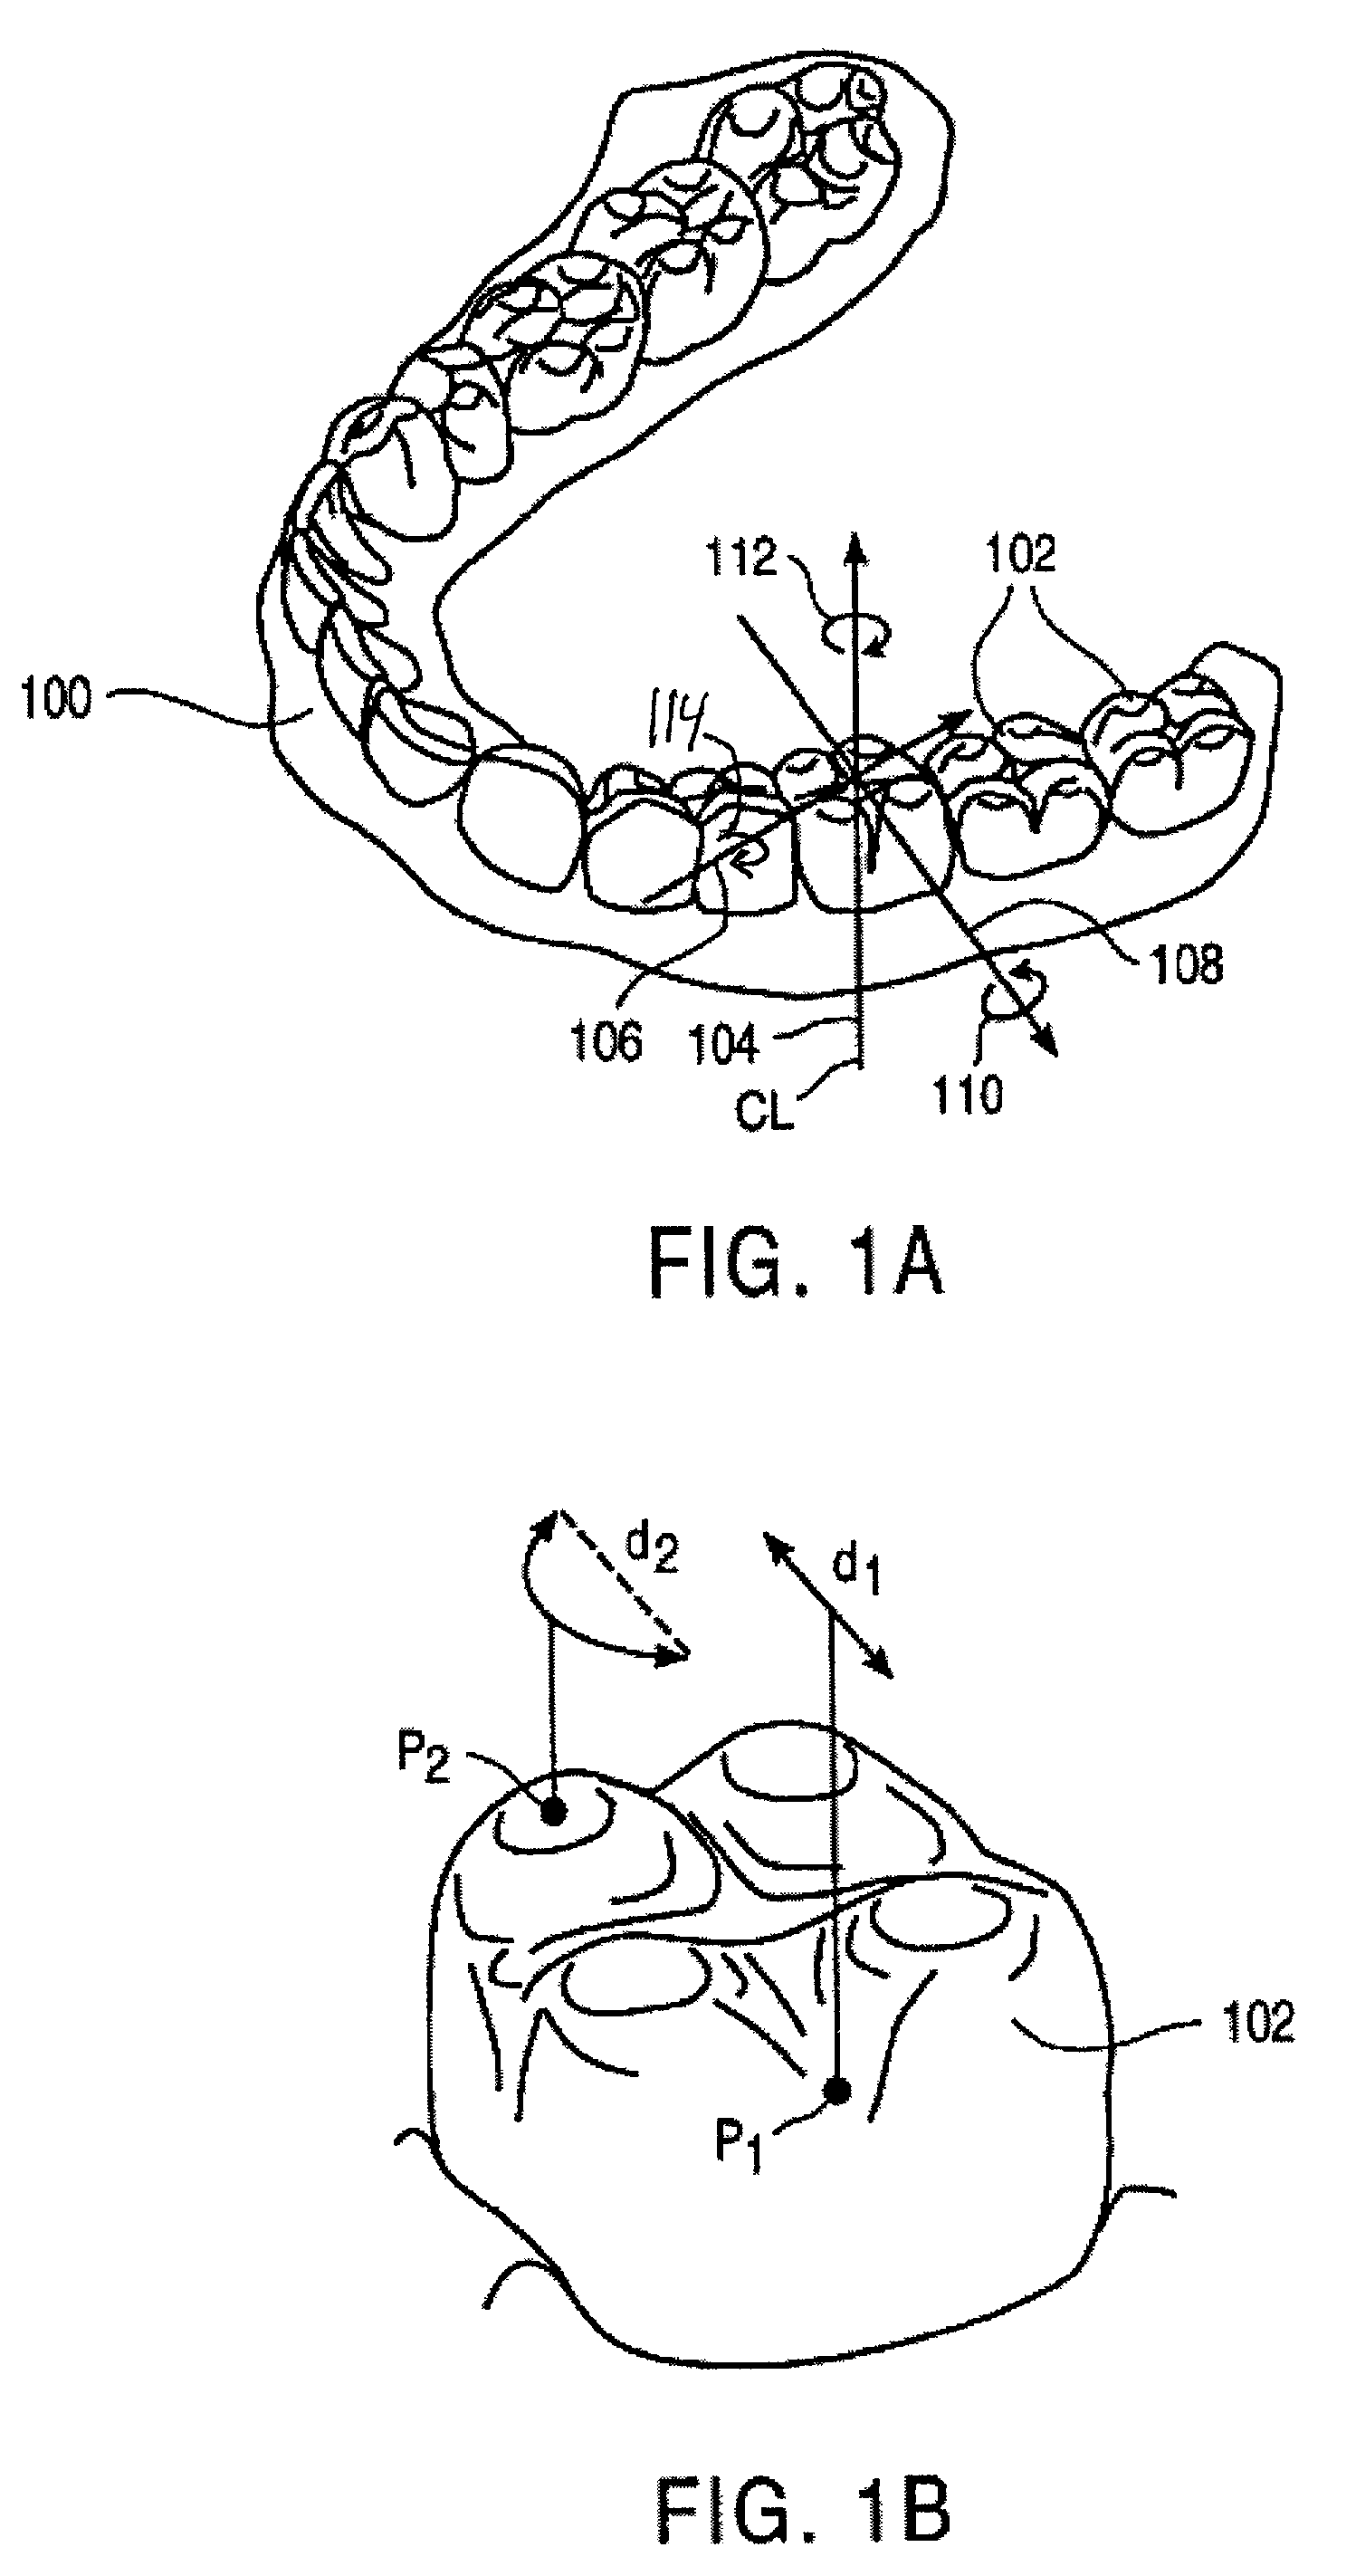 Methods and systems for treating teeth